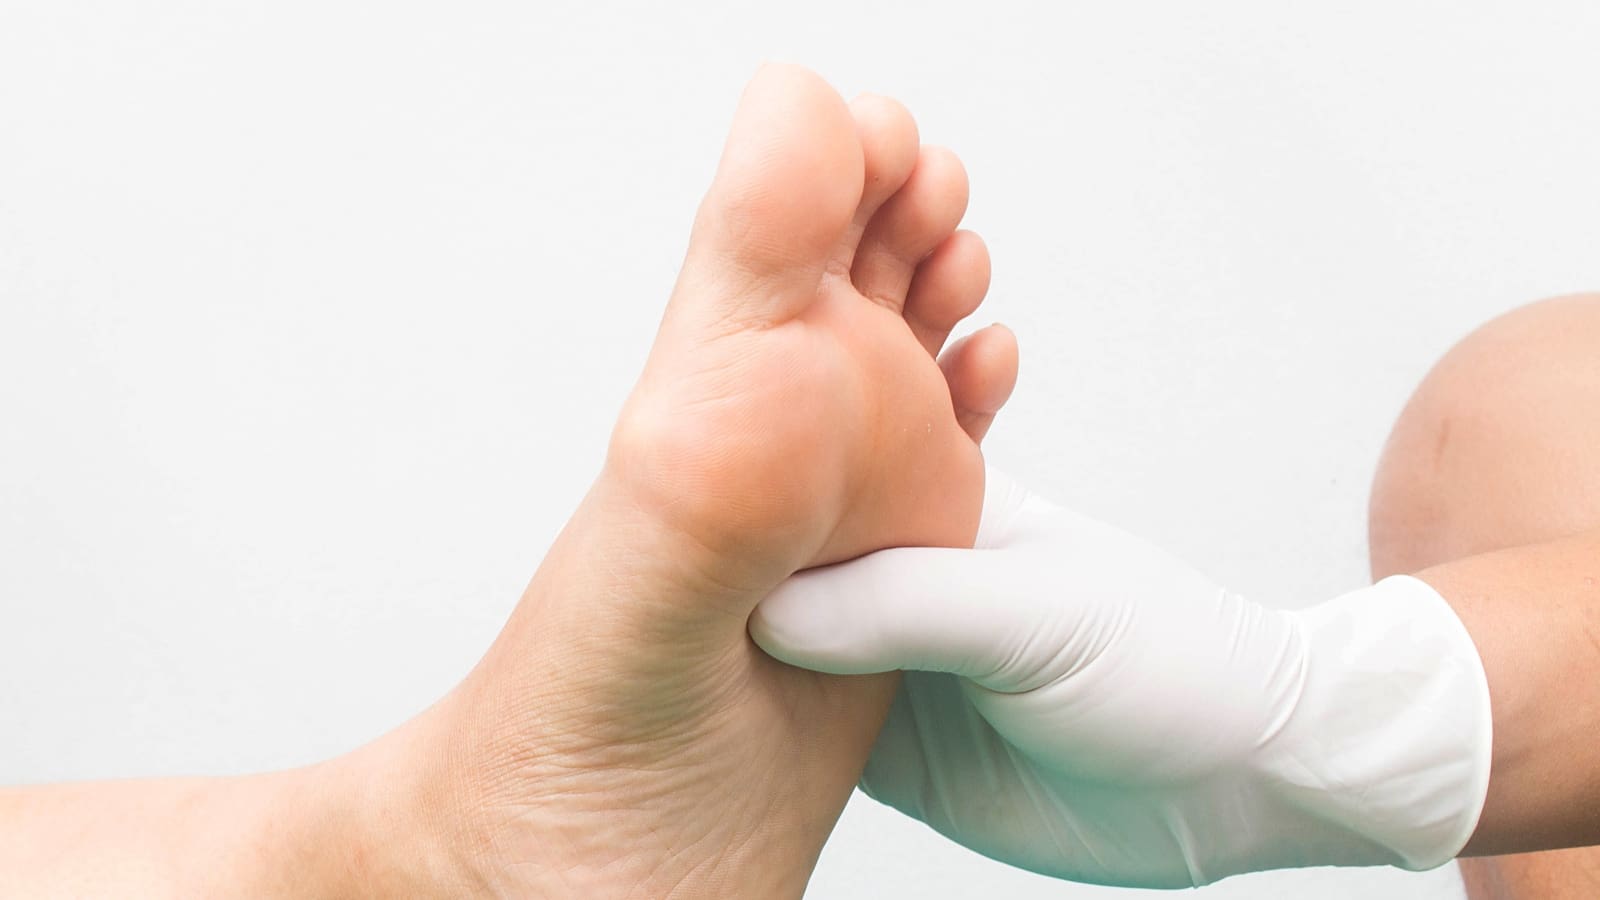 How does diabetes affect your feet?